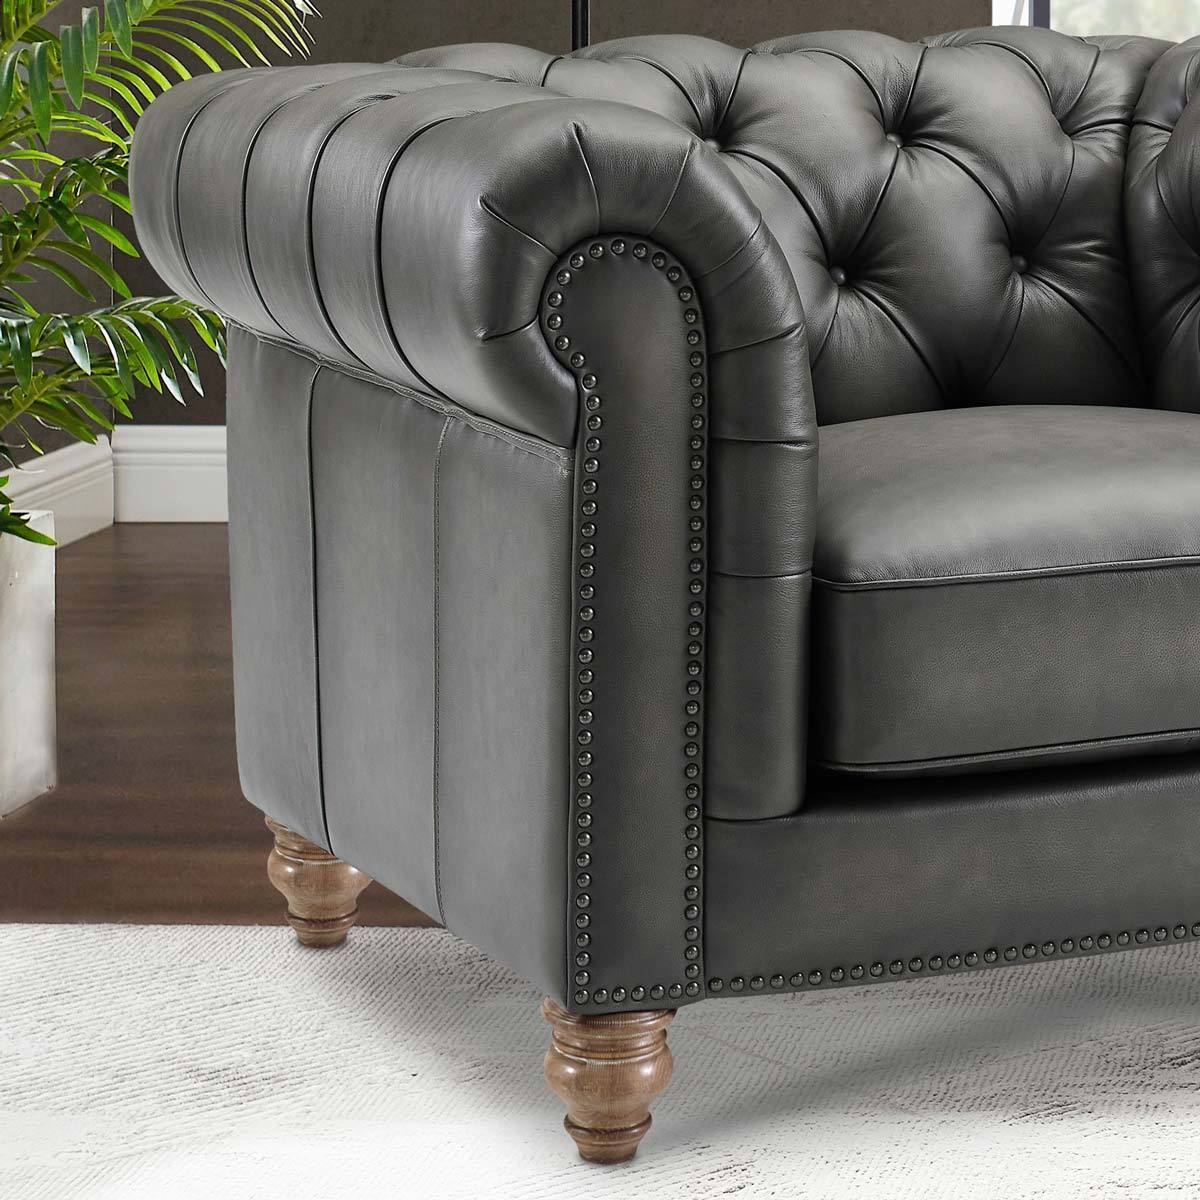 Allington Grey Leather Chesterfield Armchair - Signature Retail Stores